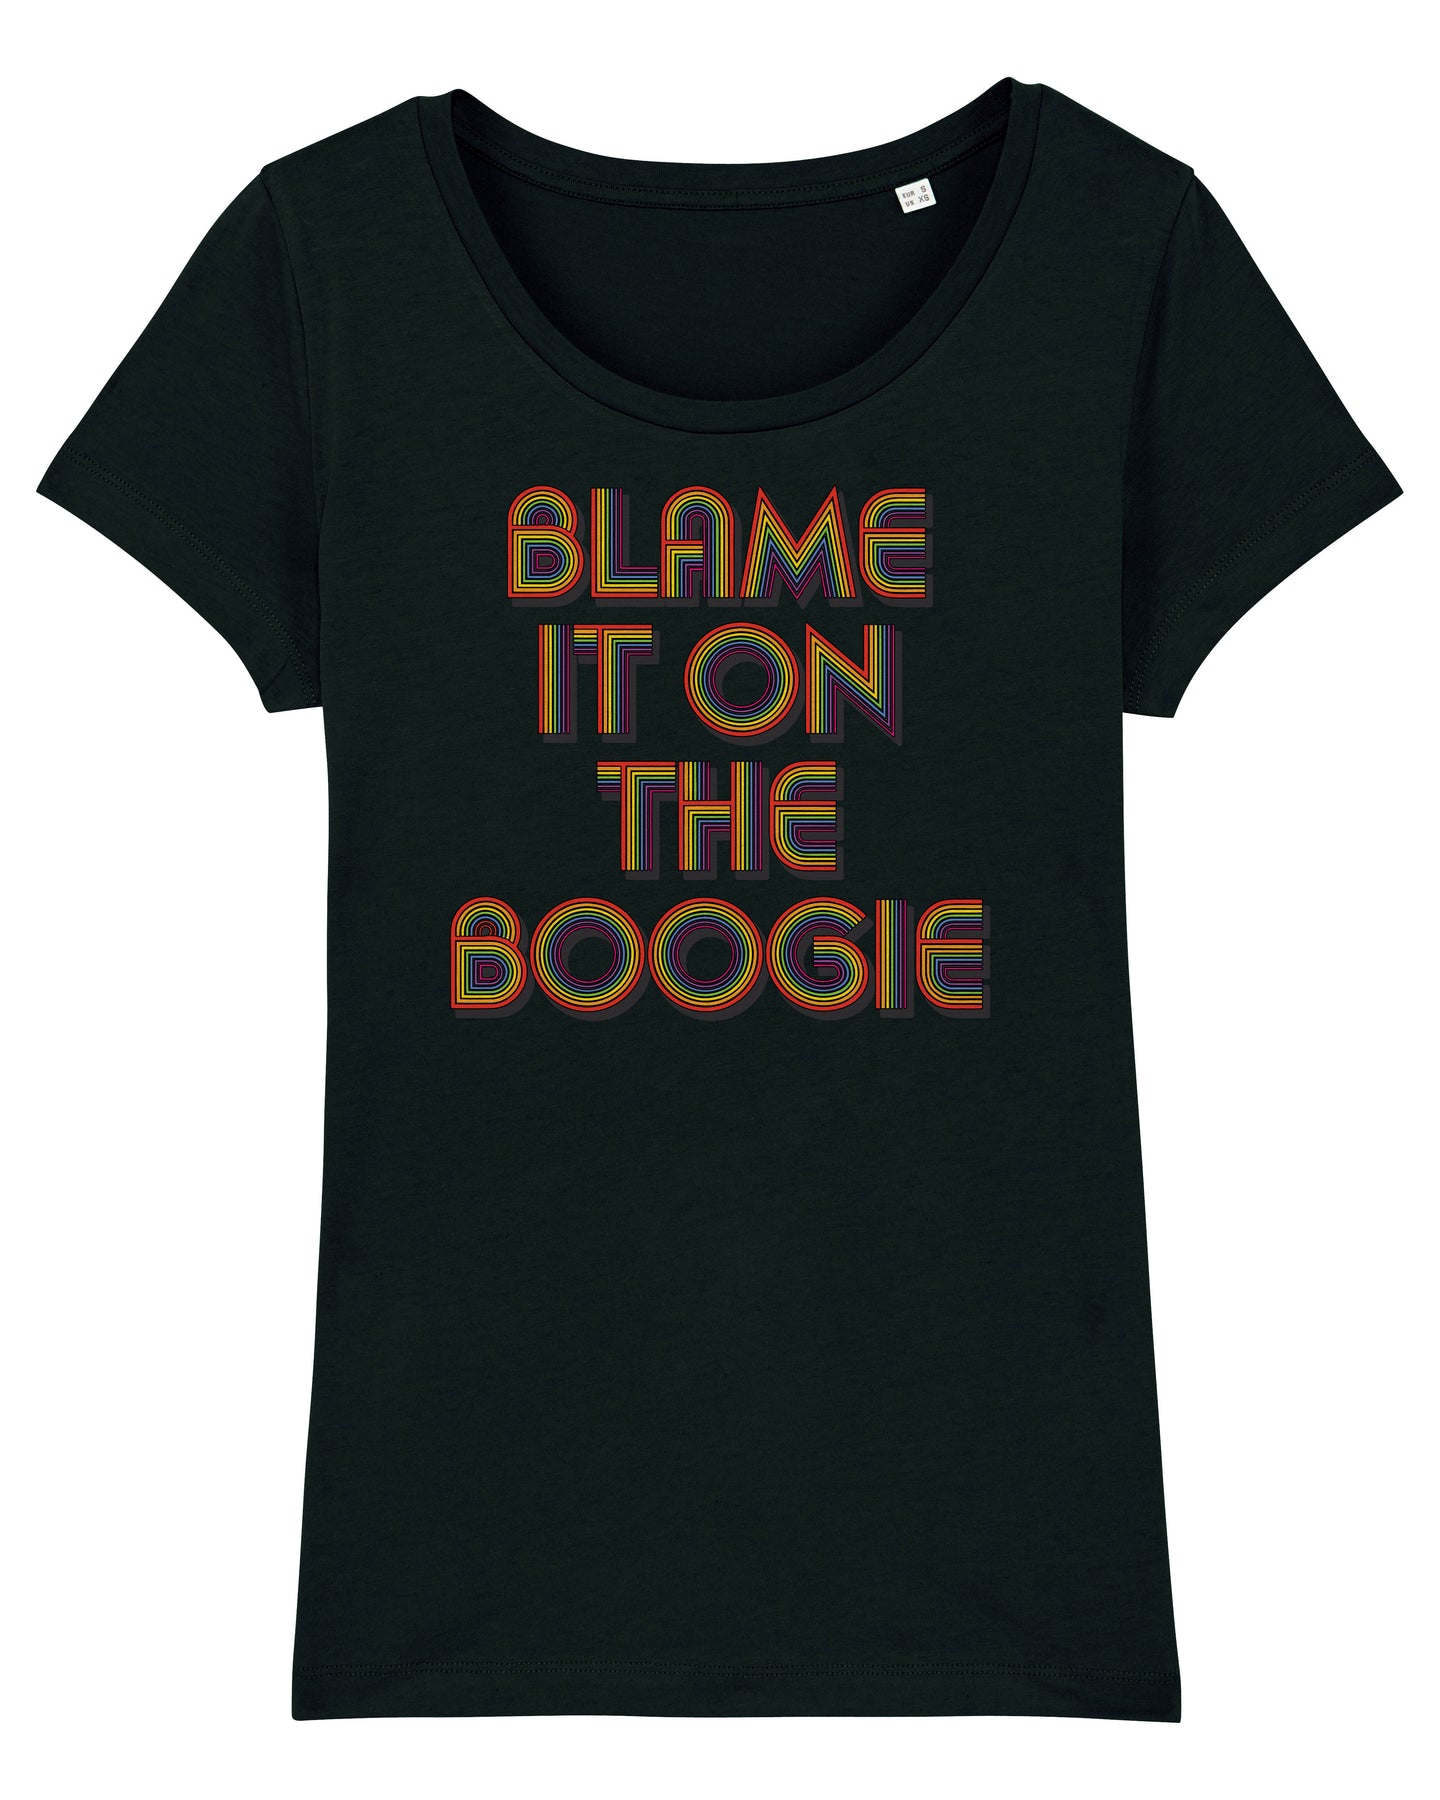 Blame It On The Boogie Women's T-Shirt